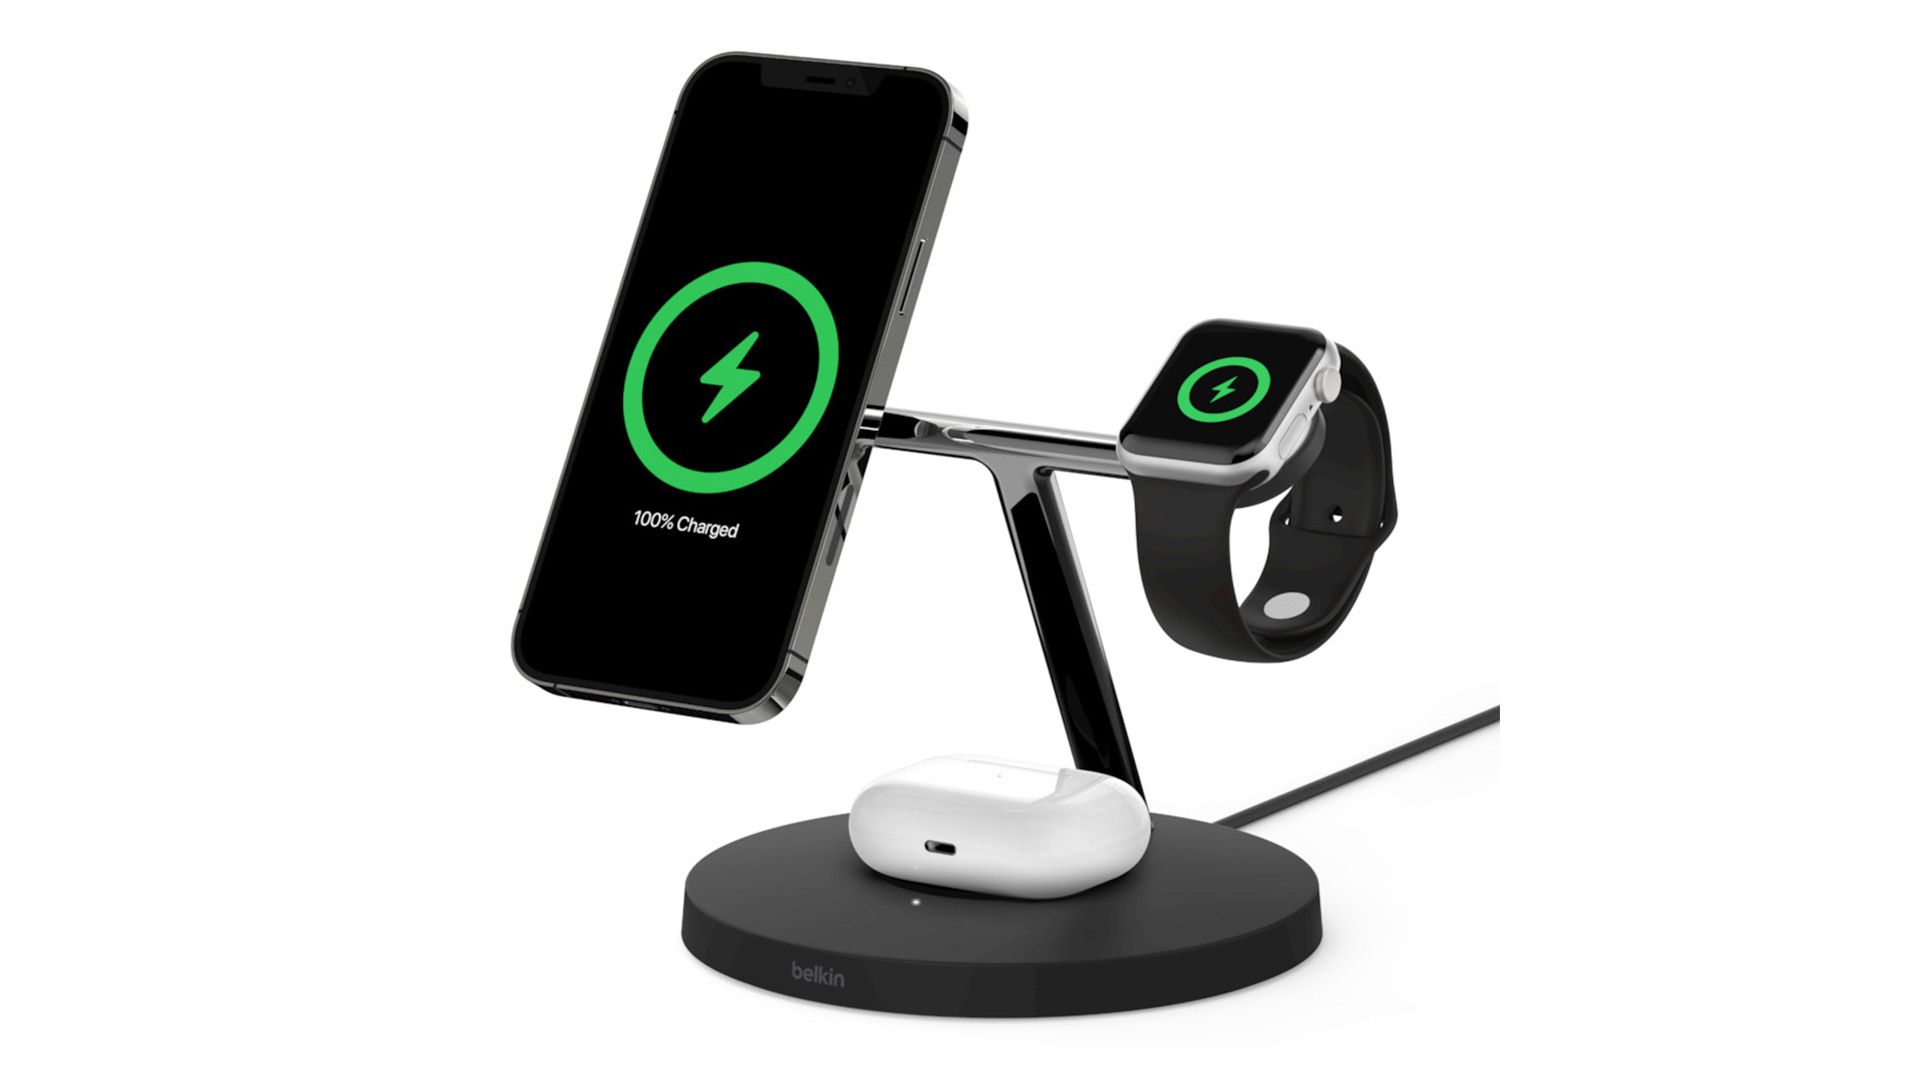 Belkin BoostUp Charge Pro 3-in-1 charging stand